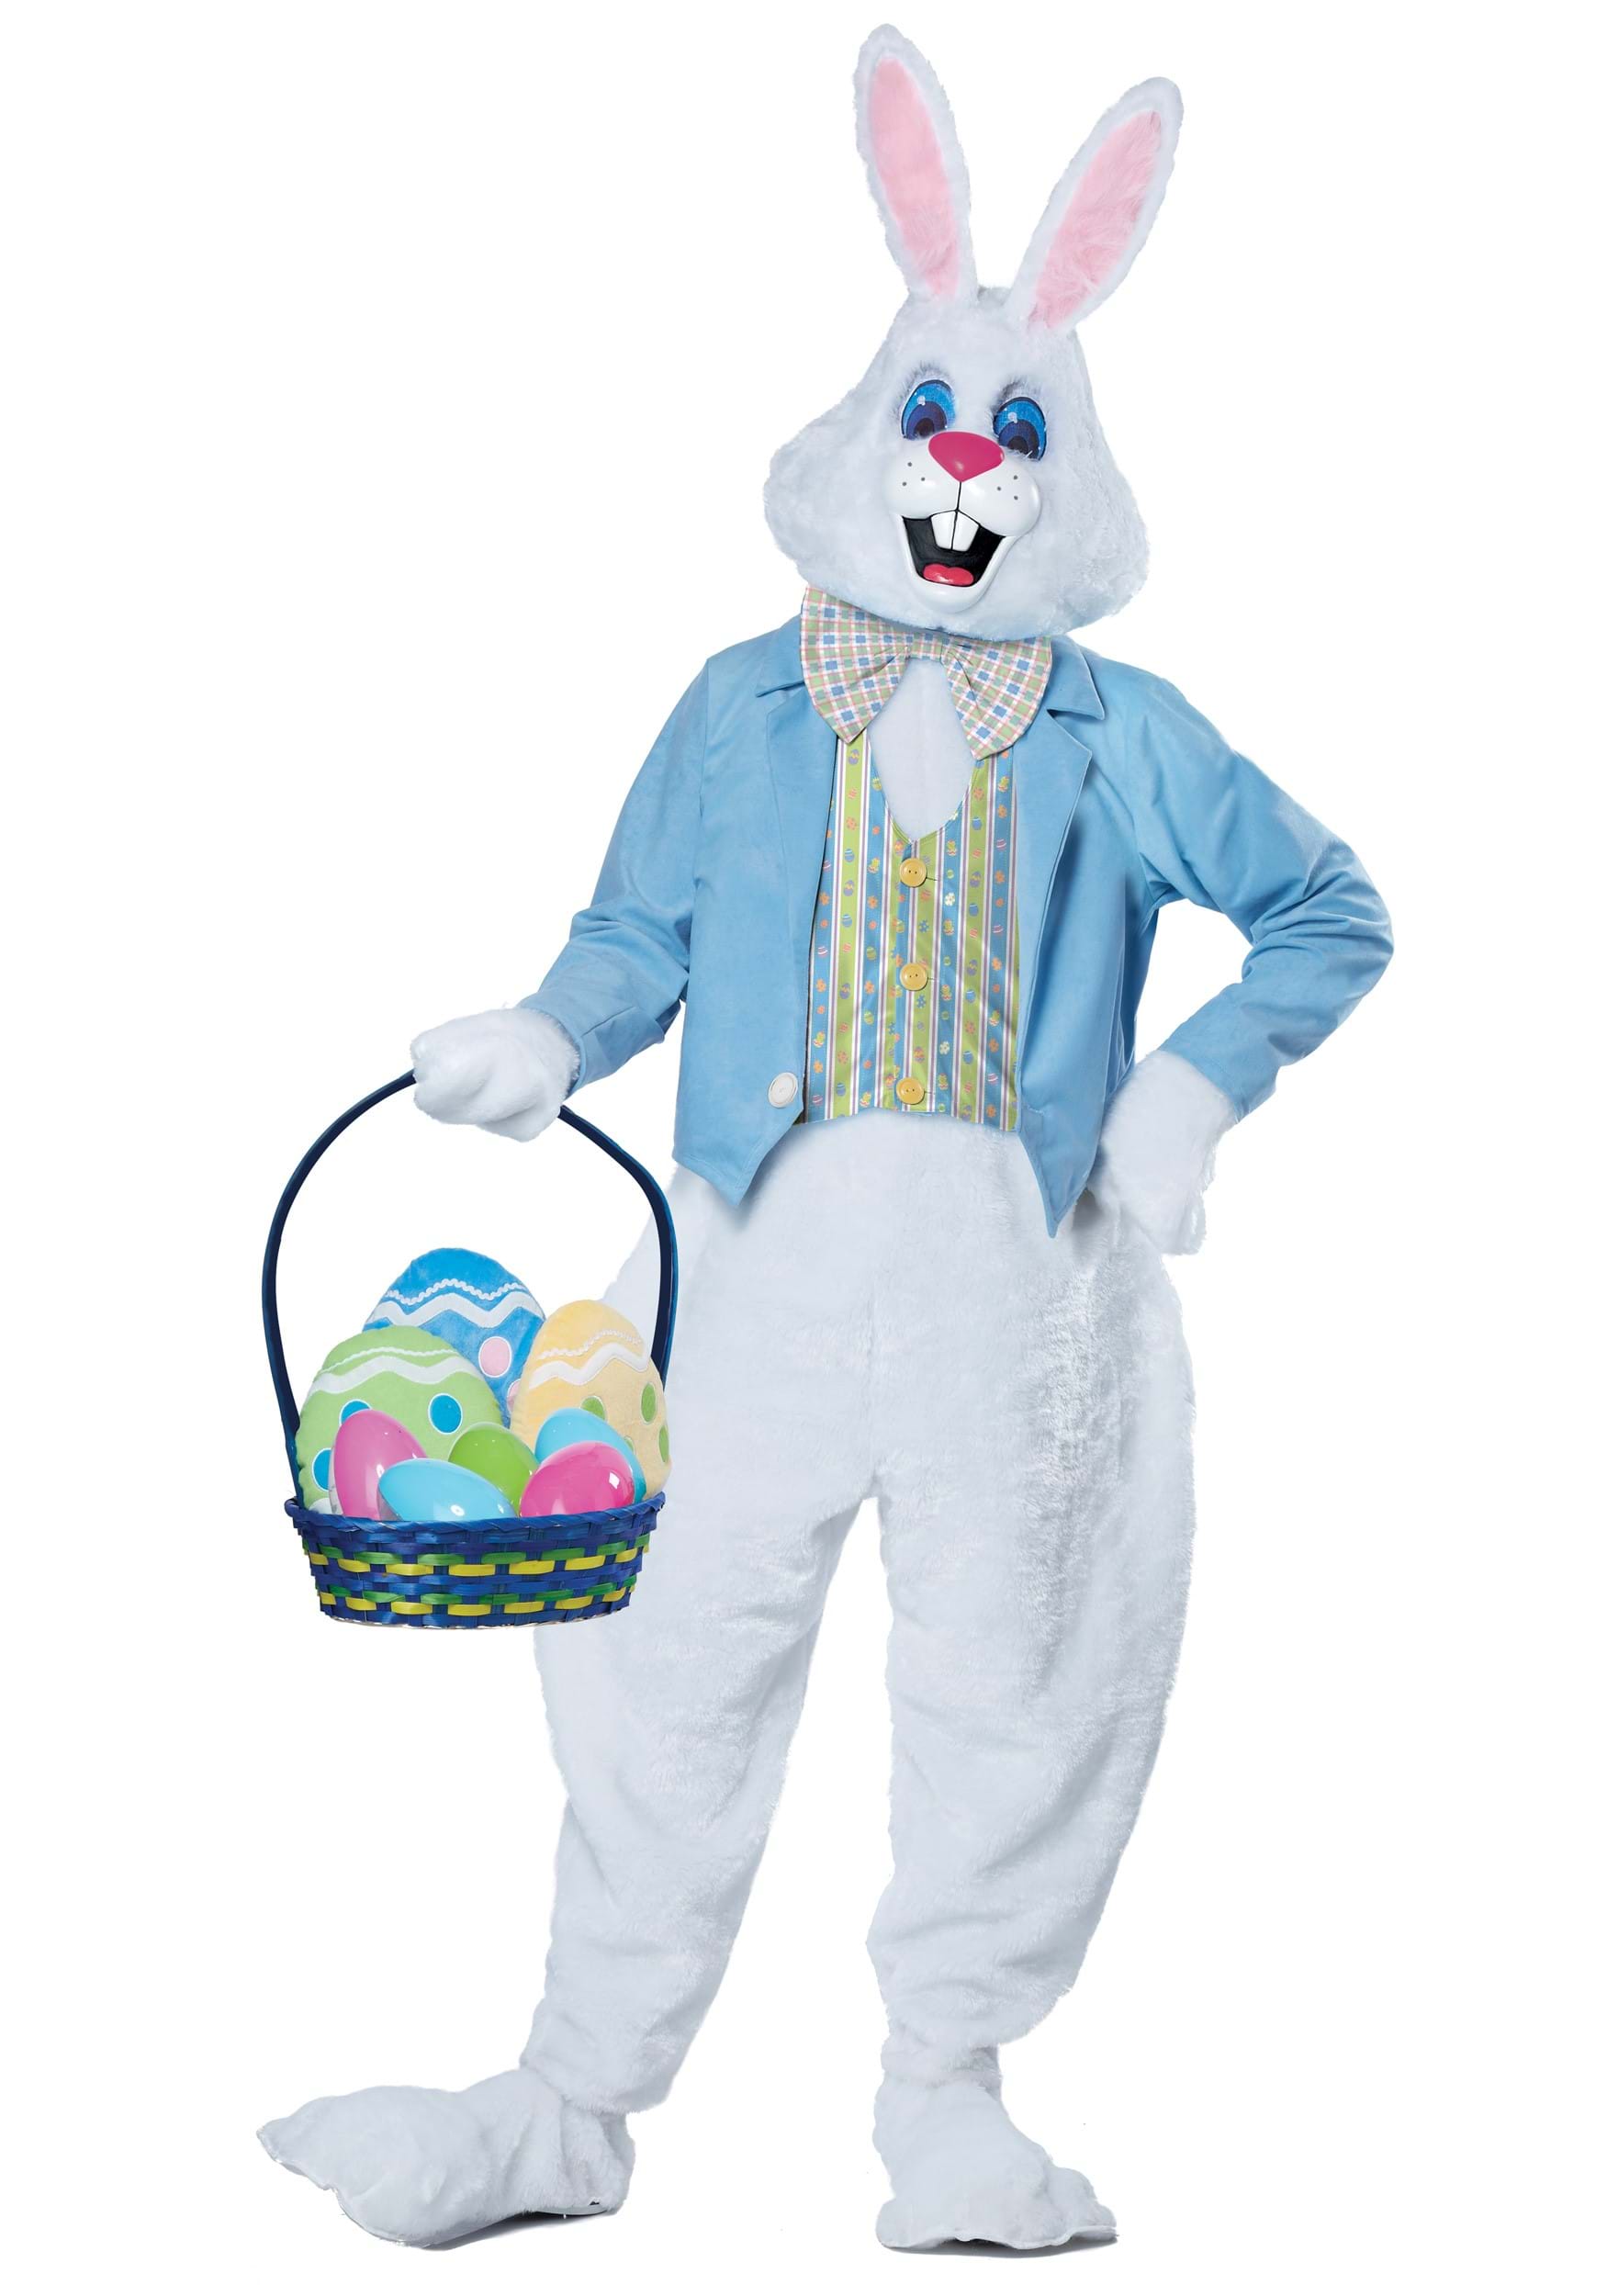 Deluxe Easter Bunny Plus Size Costume